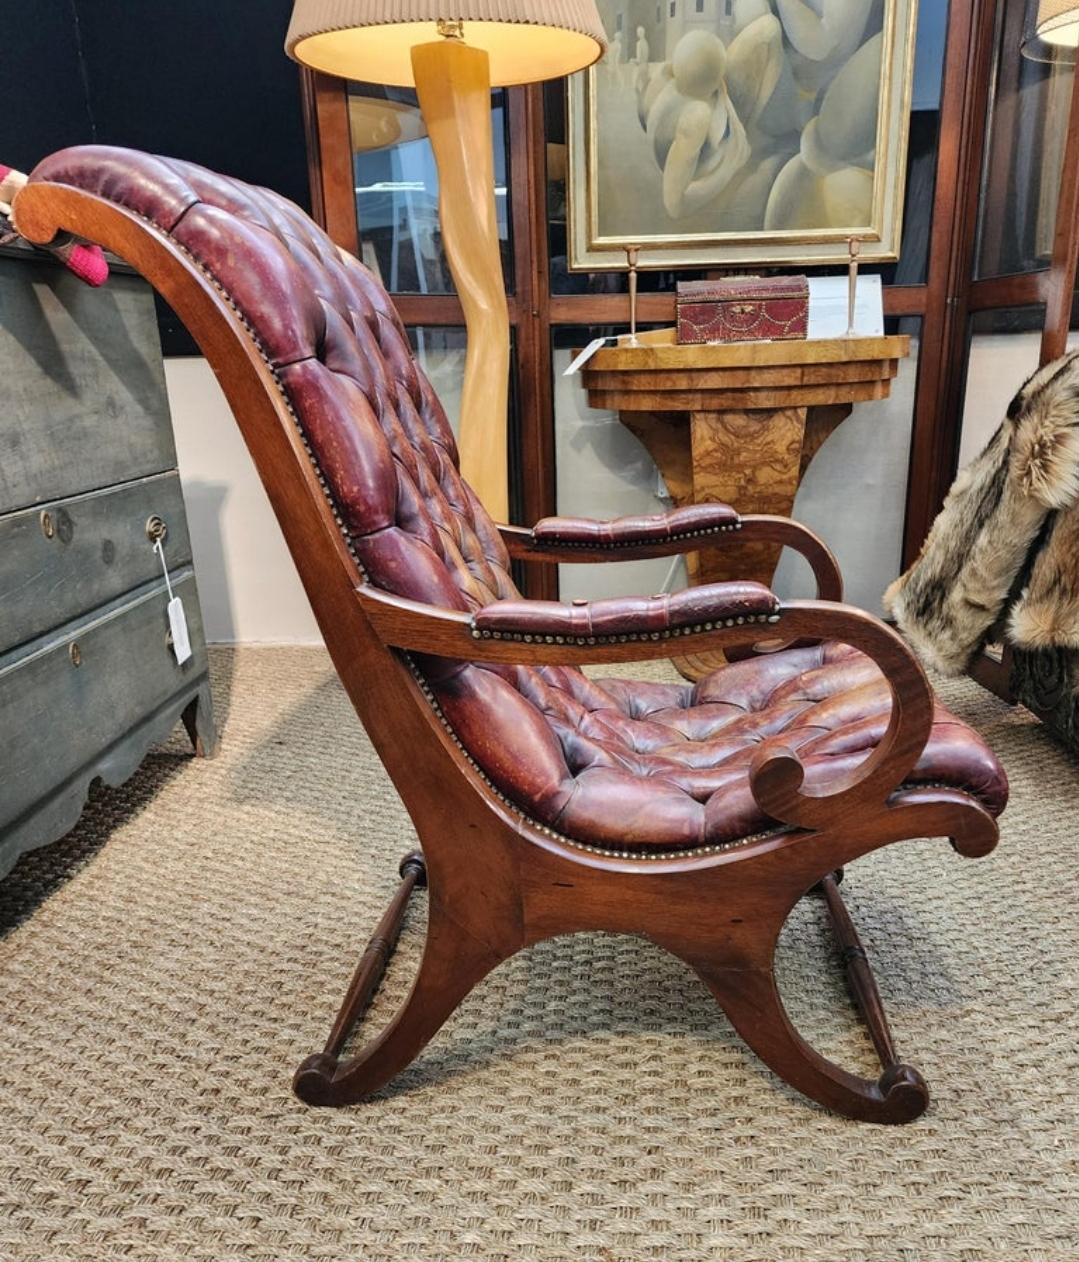 Handsome sculptural and comfortable. Those three words best tell the story of this English leather chair from the 1850's
It is beautifully constructed and has the patina warmth and age.
This can be viewed and at The Berkshire Galleries in Great